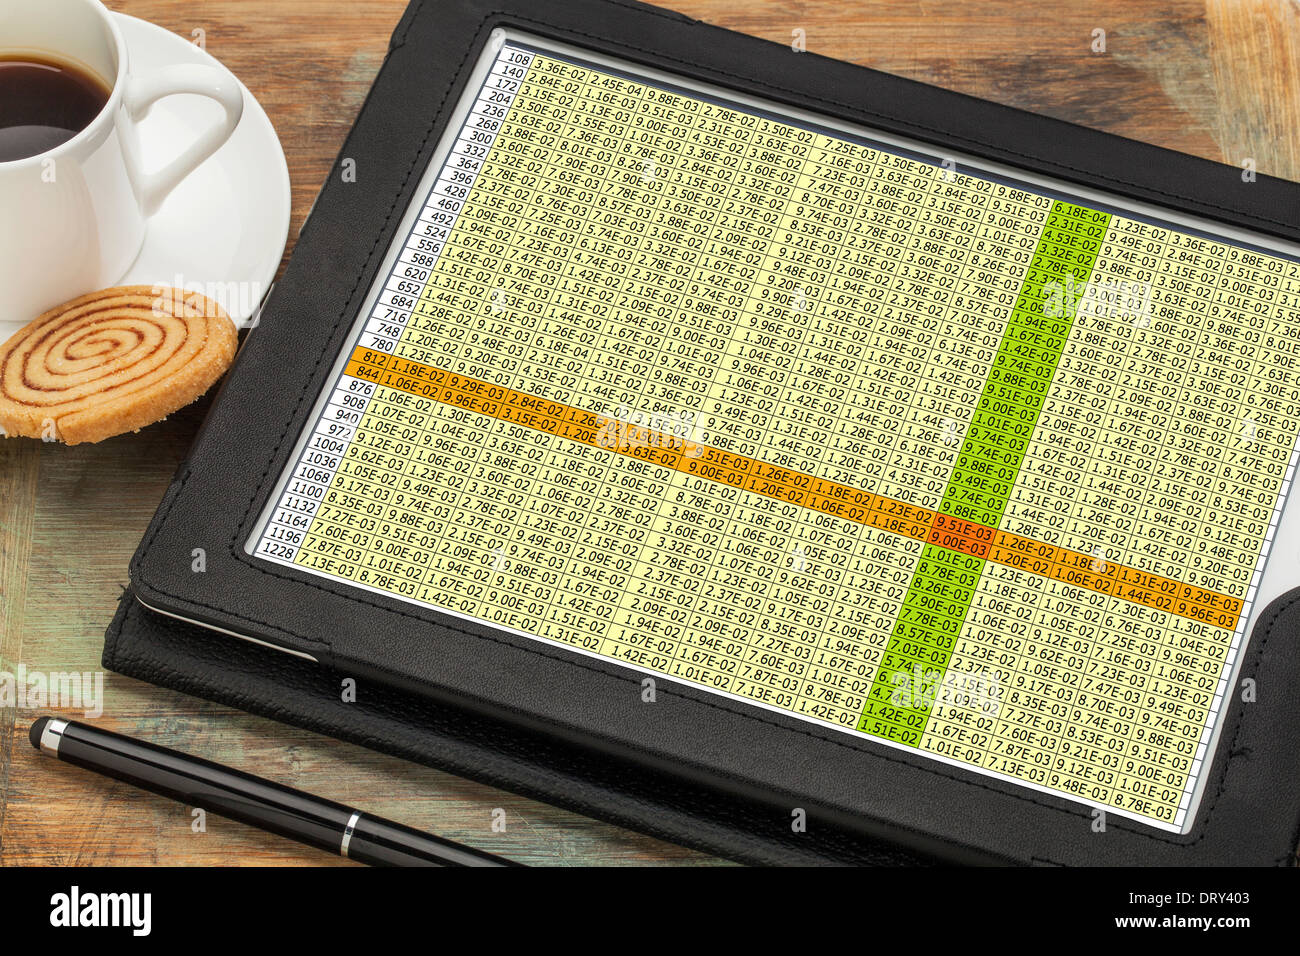 business concept - data spreadsheet on a digital tablet with a cup of coffee Stock Photo